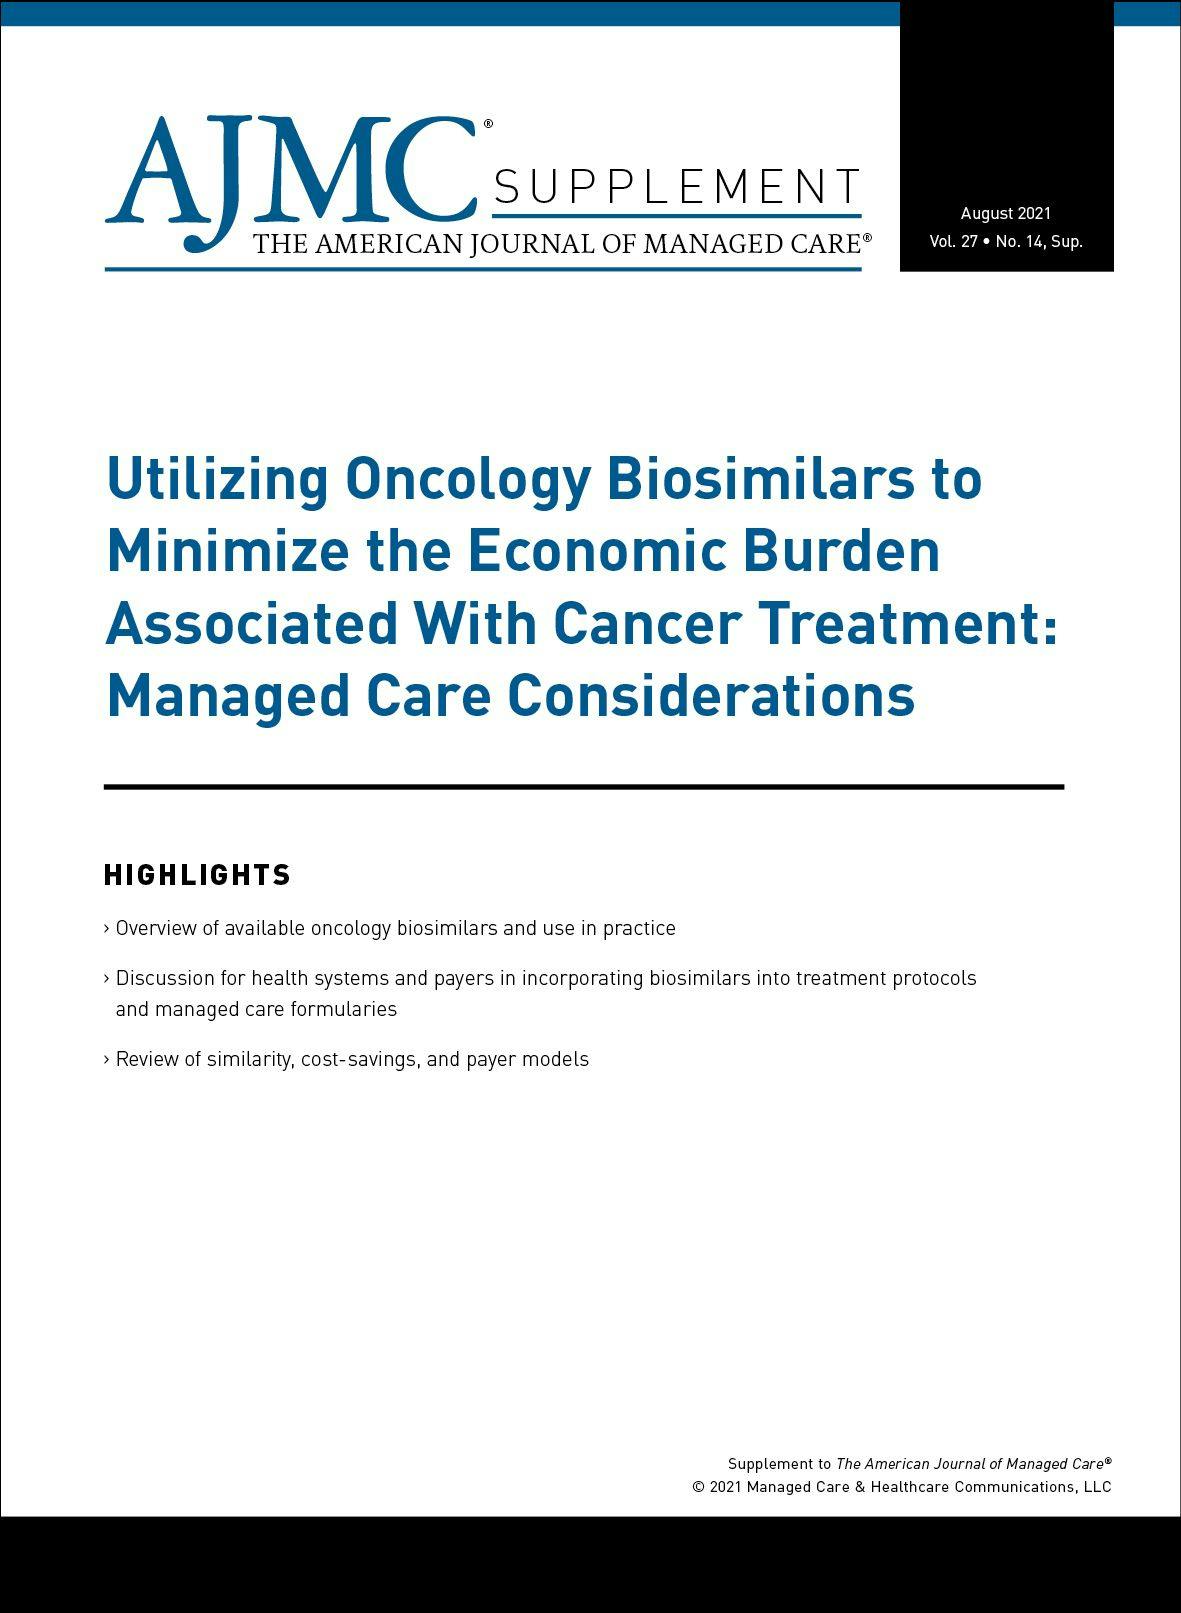 Utilizing Oncology Biosimilars to Minimize the Economic Burden Associated With Cancer Treatment: Managed Care Considerations